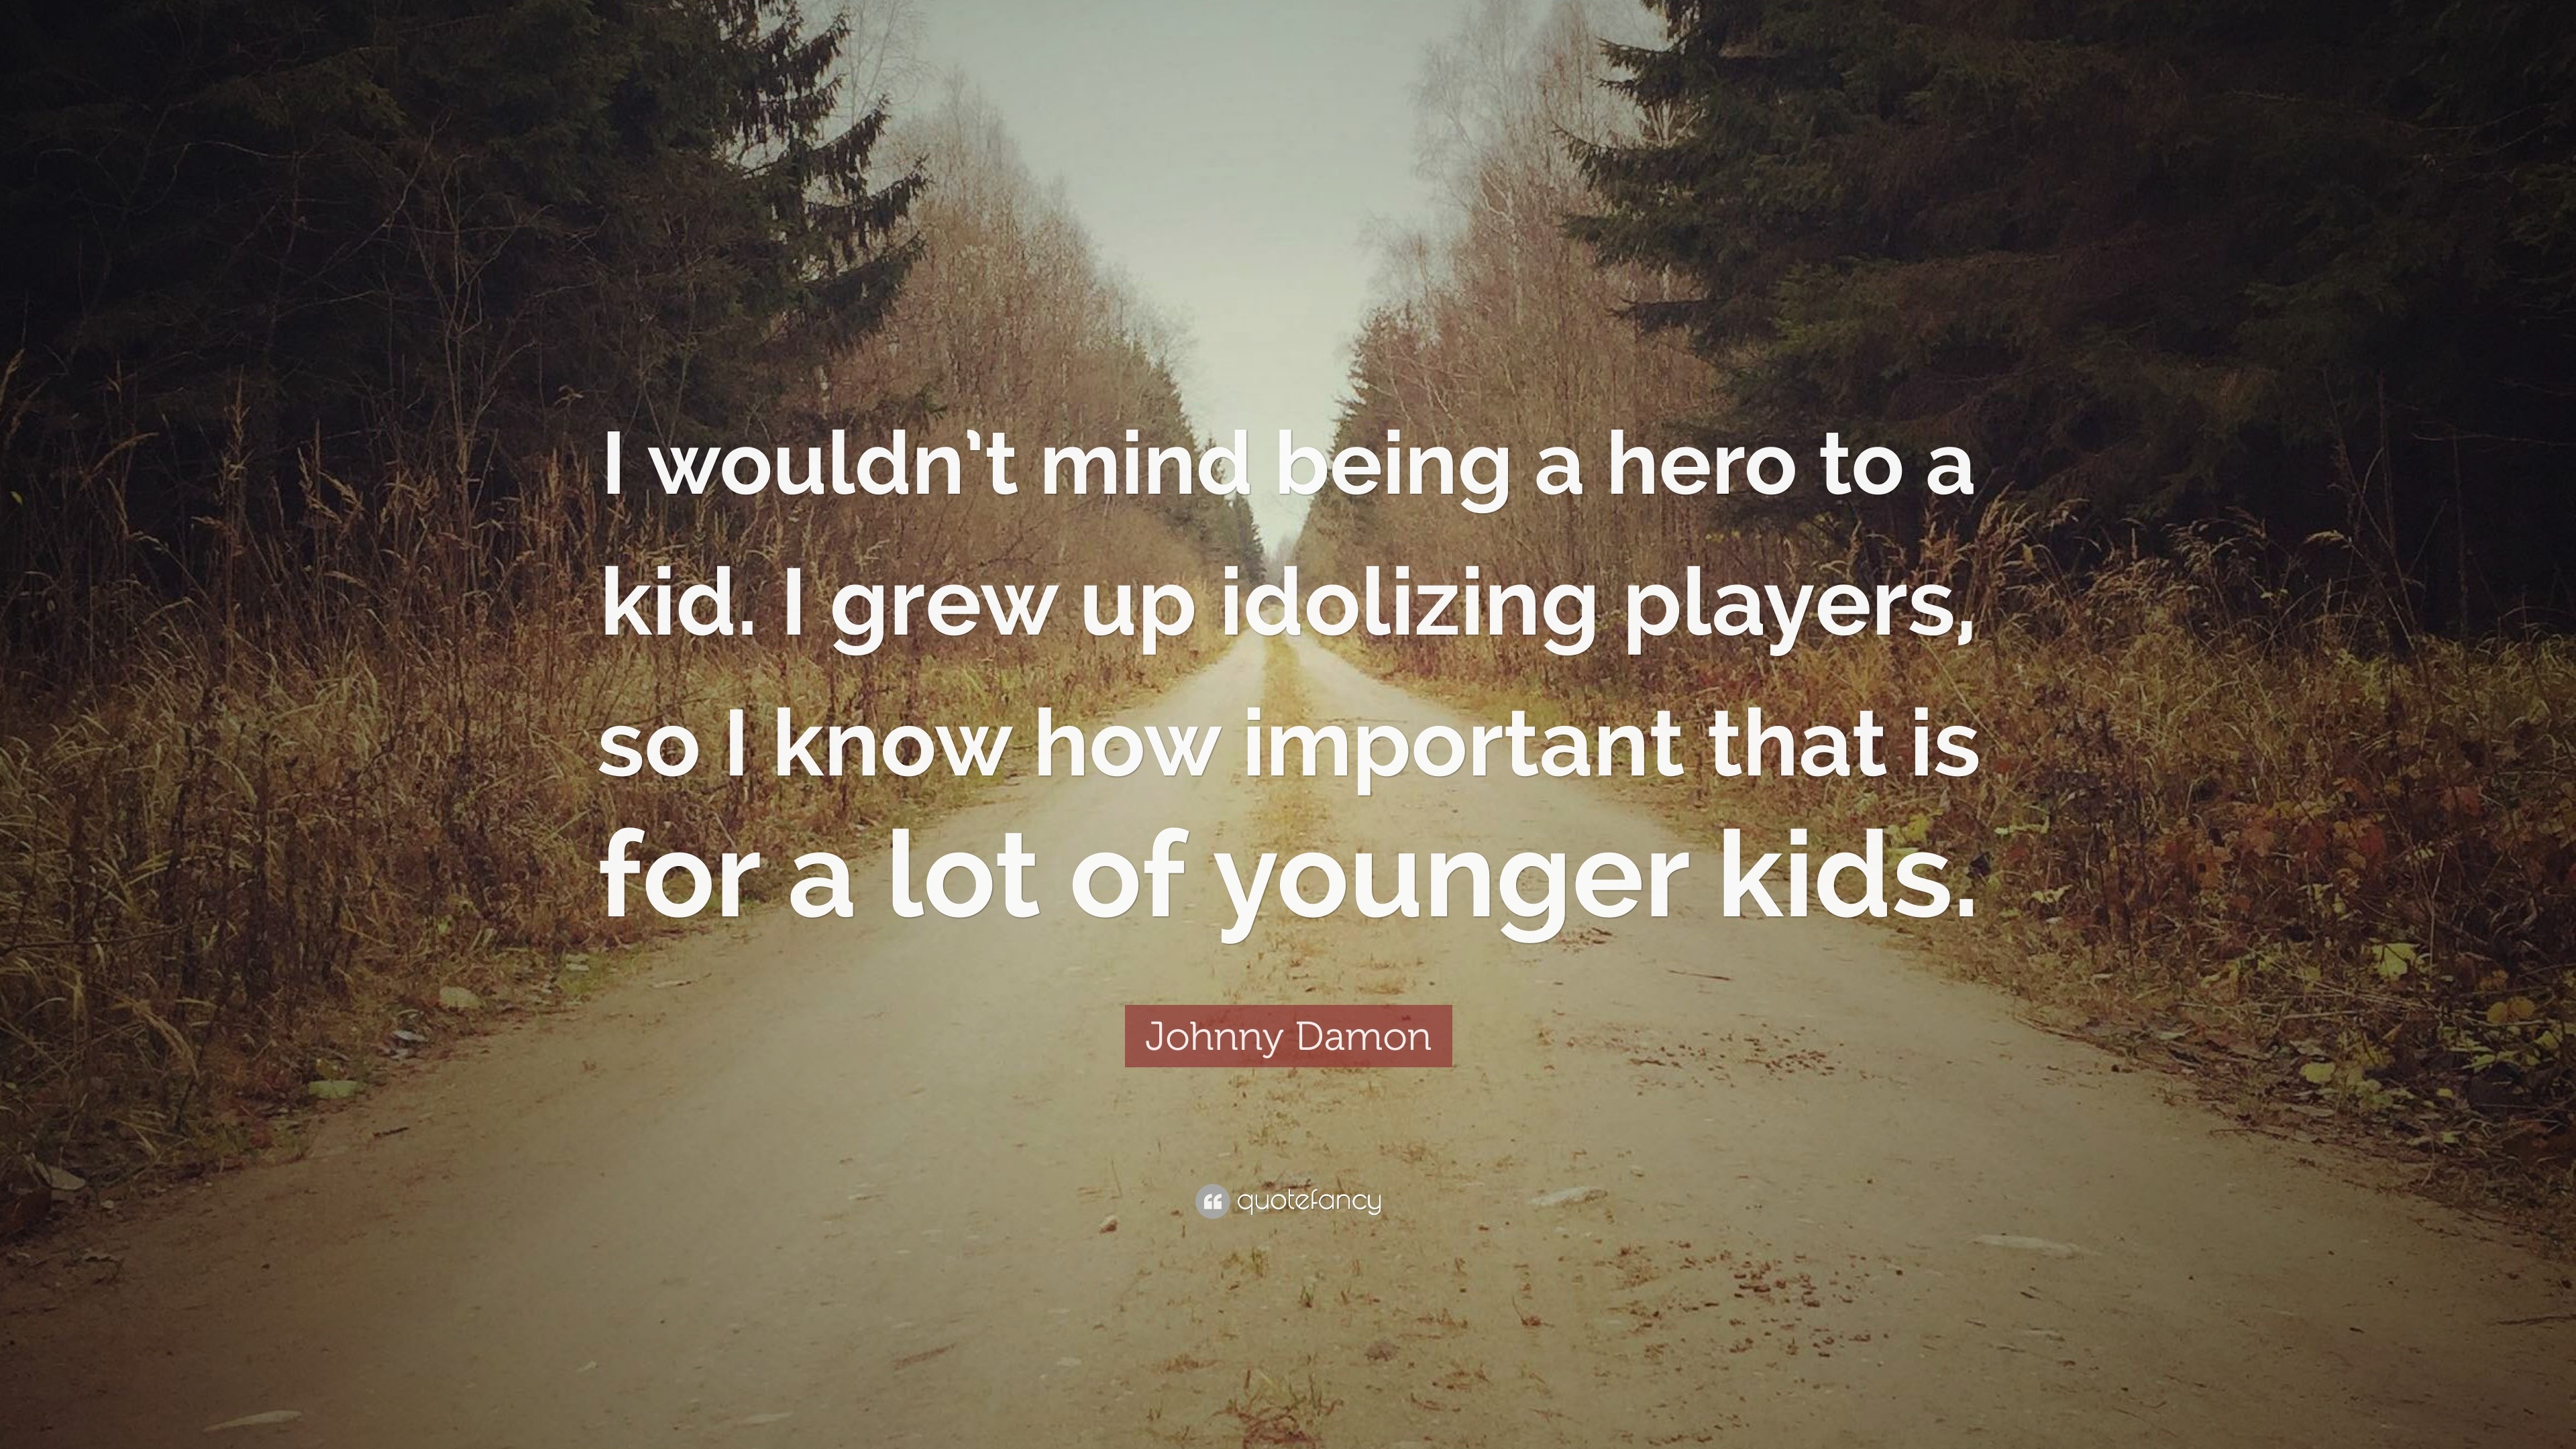 Johnny Damon Quote: “I wouldn't mind being a hero to a kid. I grew